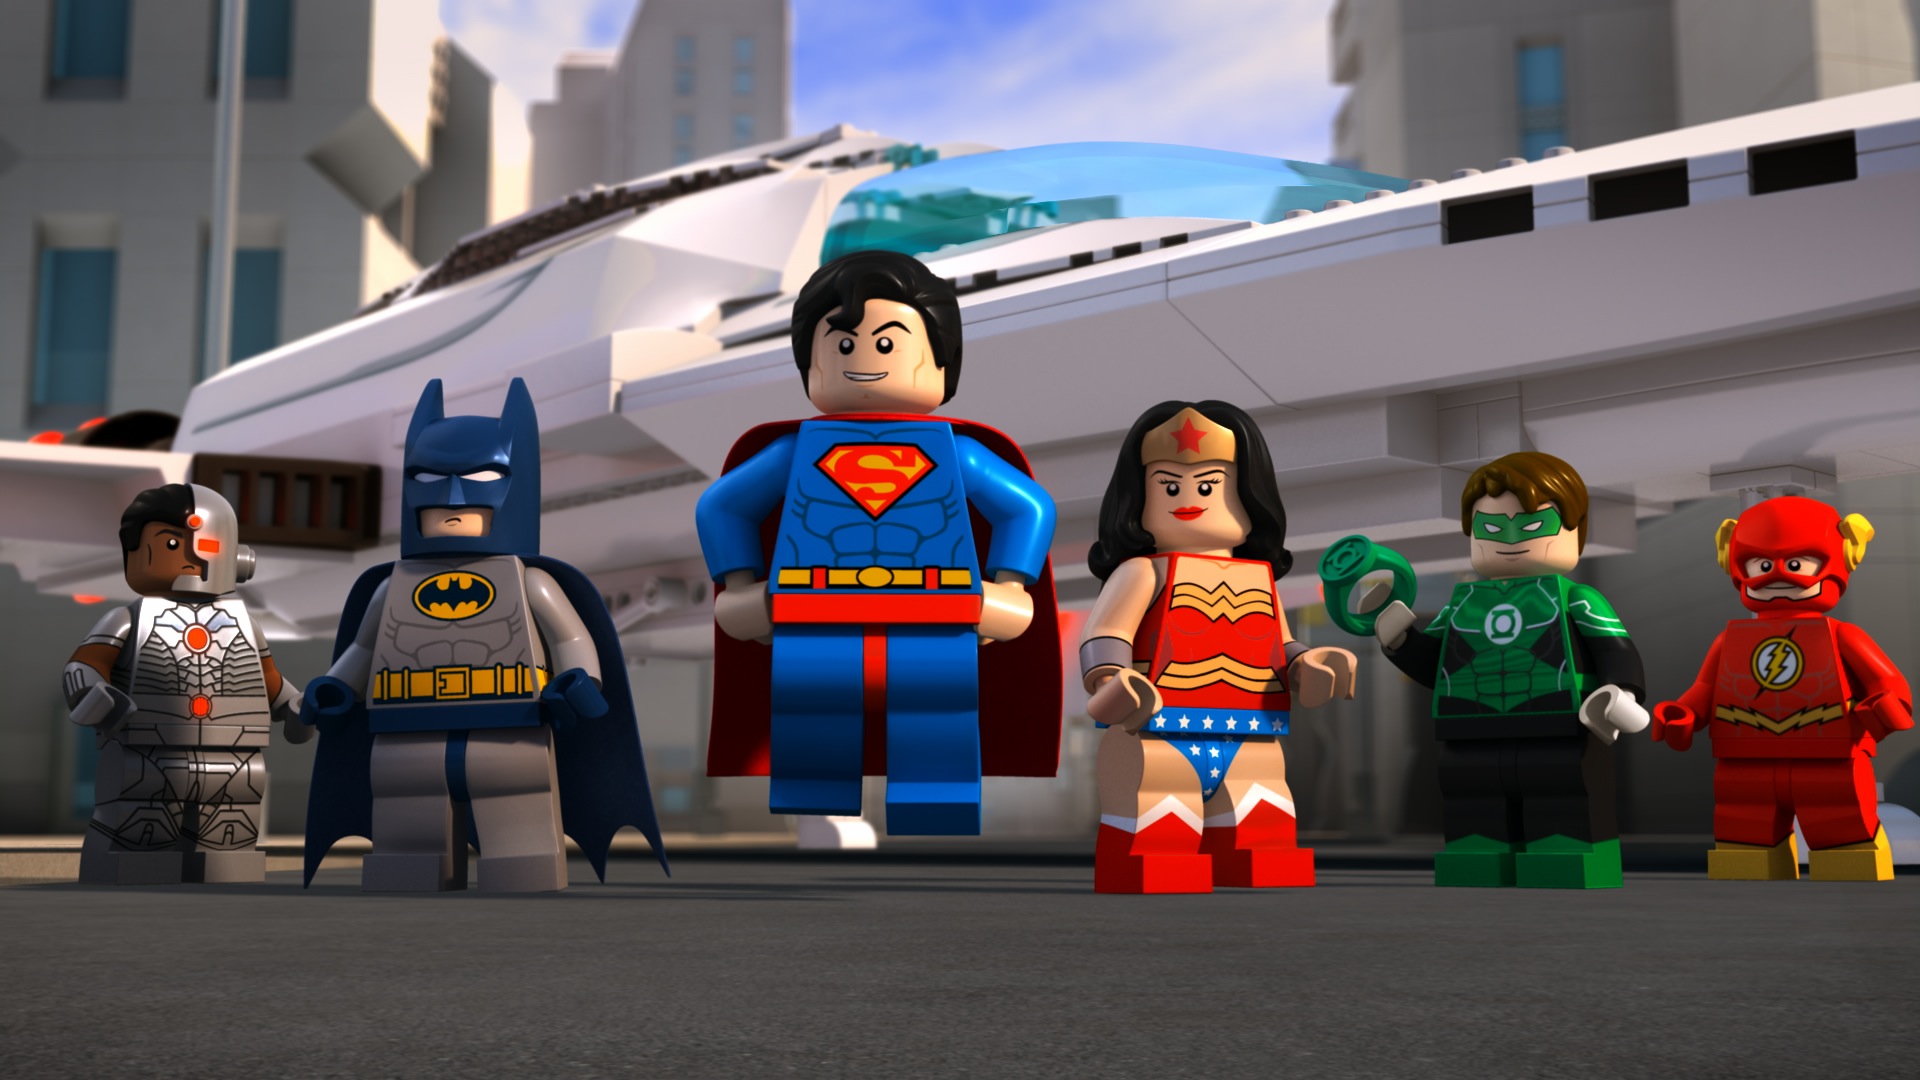 LEGO DC Super Heroes: Justice League - Attack Of The Legion Of Doom! HD wallpapers, Desktop wallpaper - most viewed